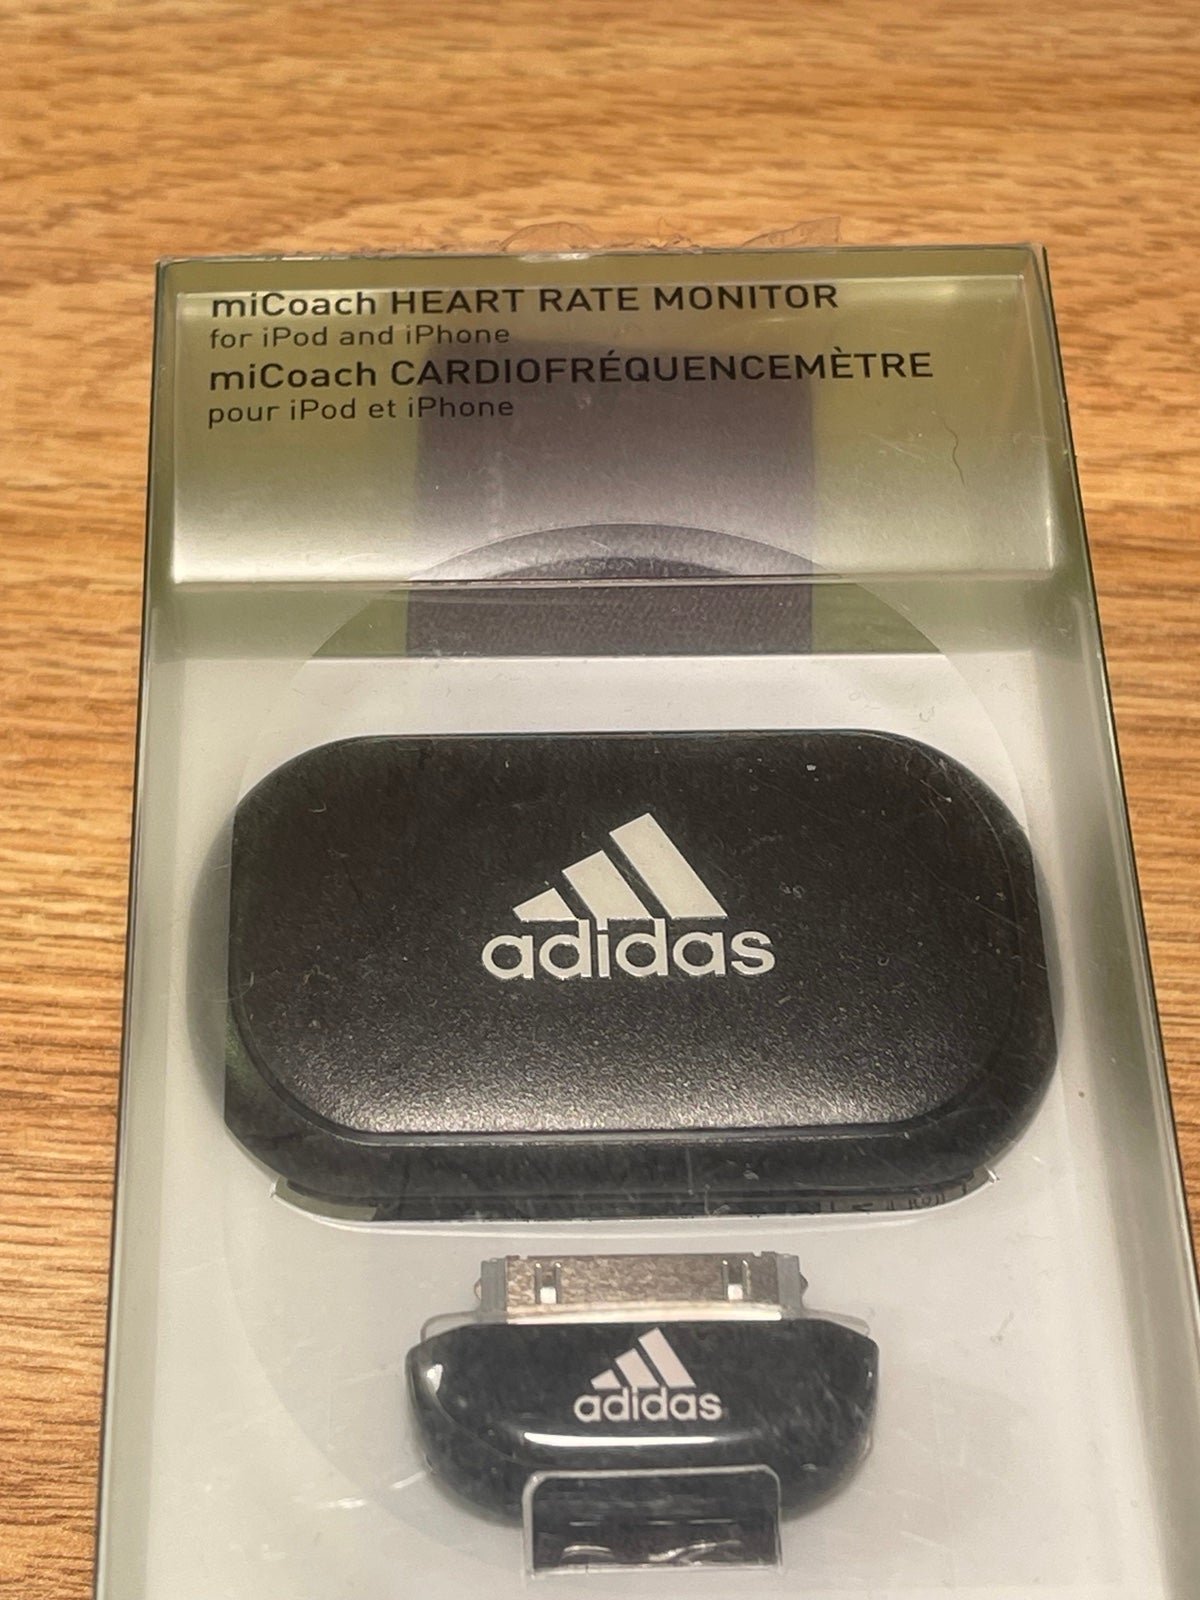 Adidas miCoach Heart Rate Monitor w/ Connector New in Package ELggzjFgF